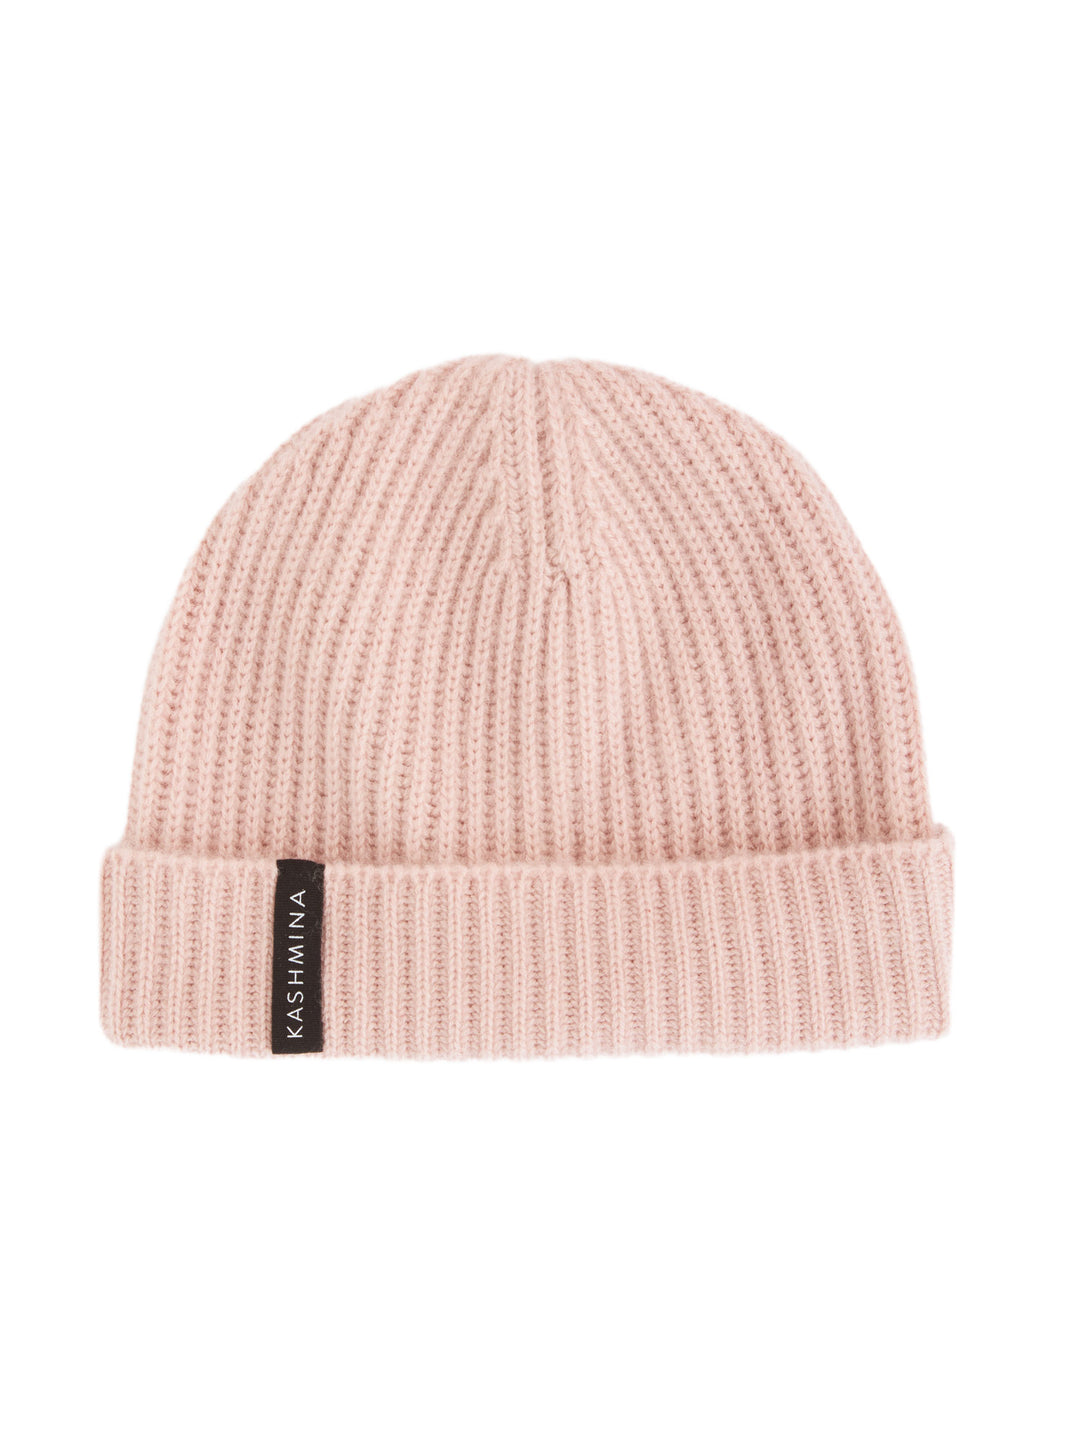 Cashmere cap for children "Mid" in 100% pure cashmere. Scandinavian design by Kashmina. Color: Rose Glow.